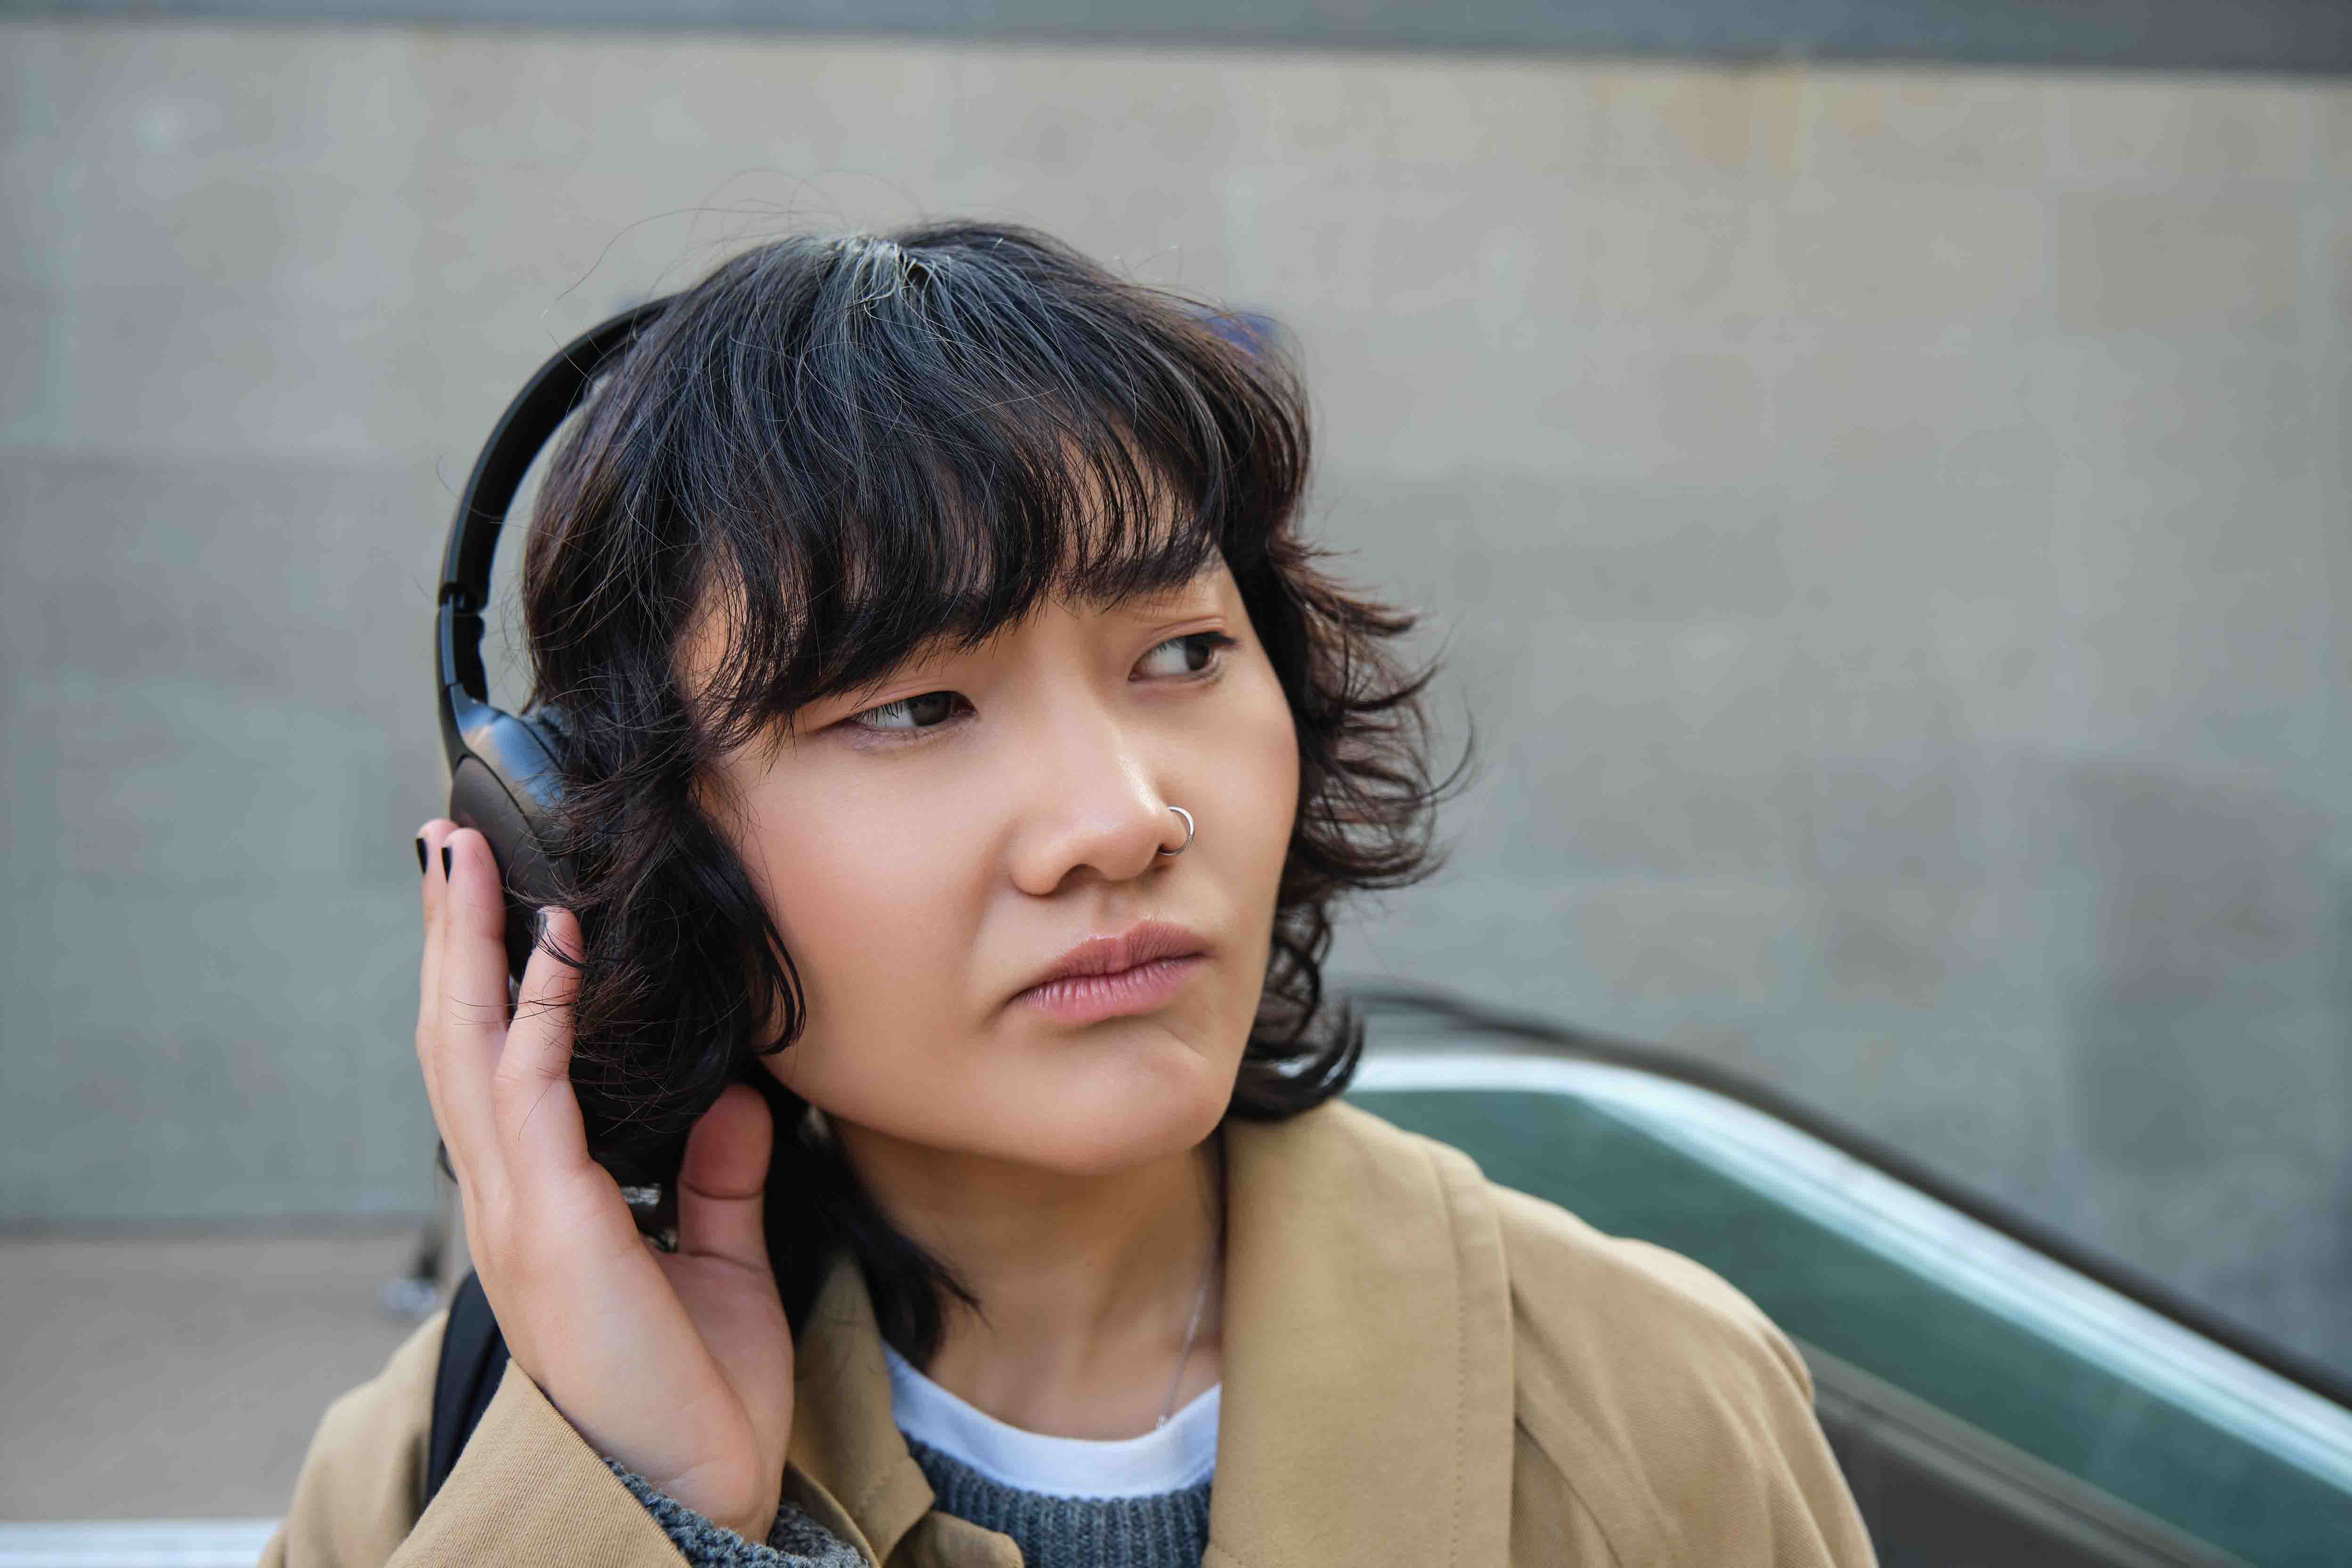 Image shows a young woman waiting for public transport.She is wearing headphones and looking to her left.